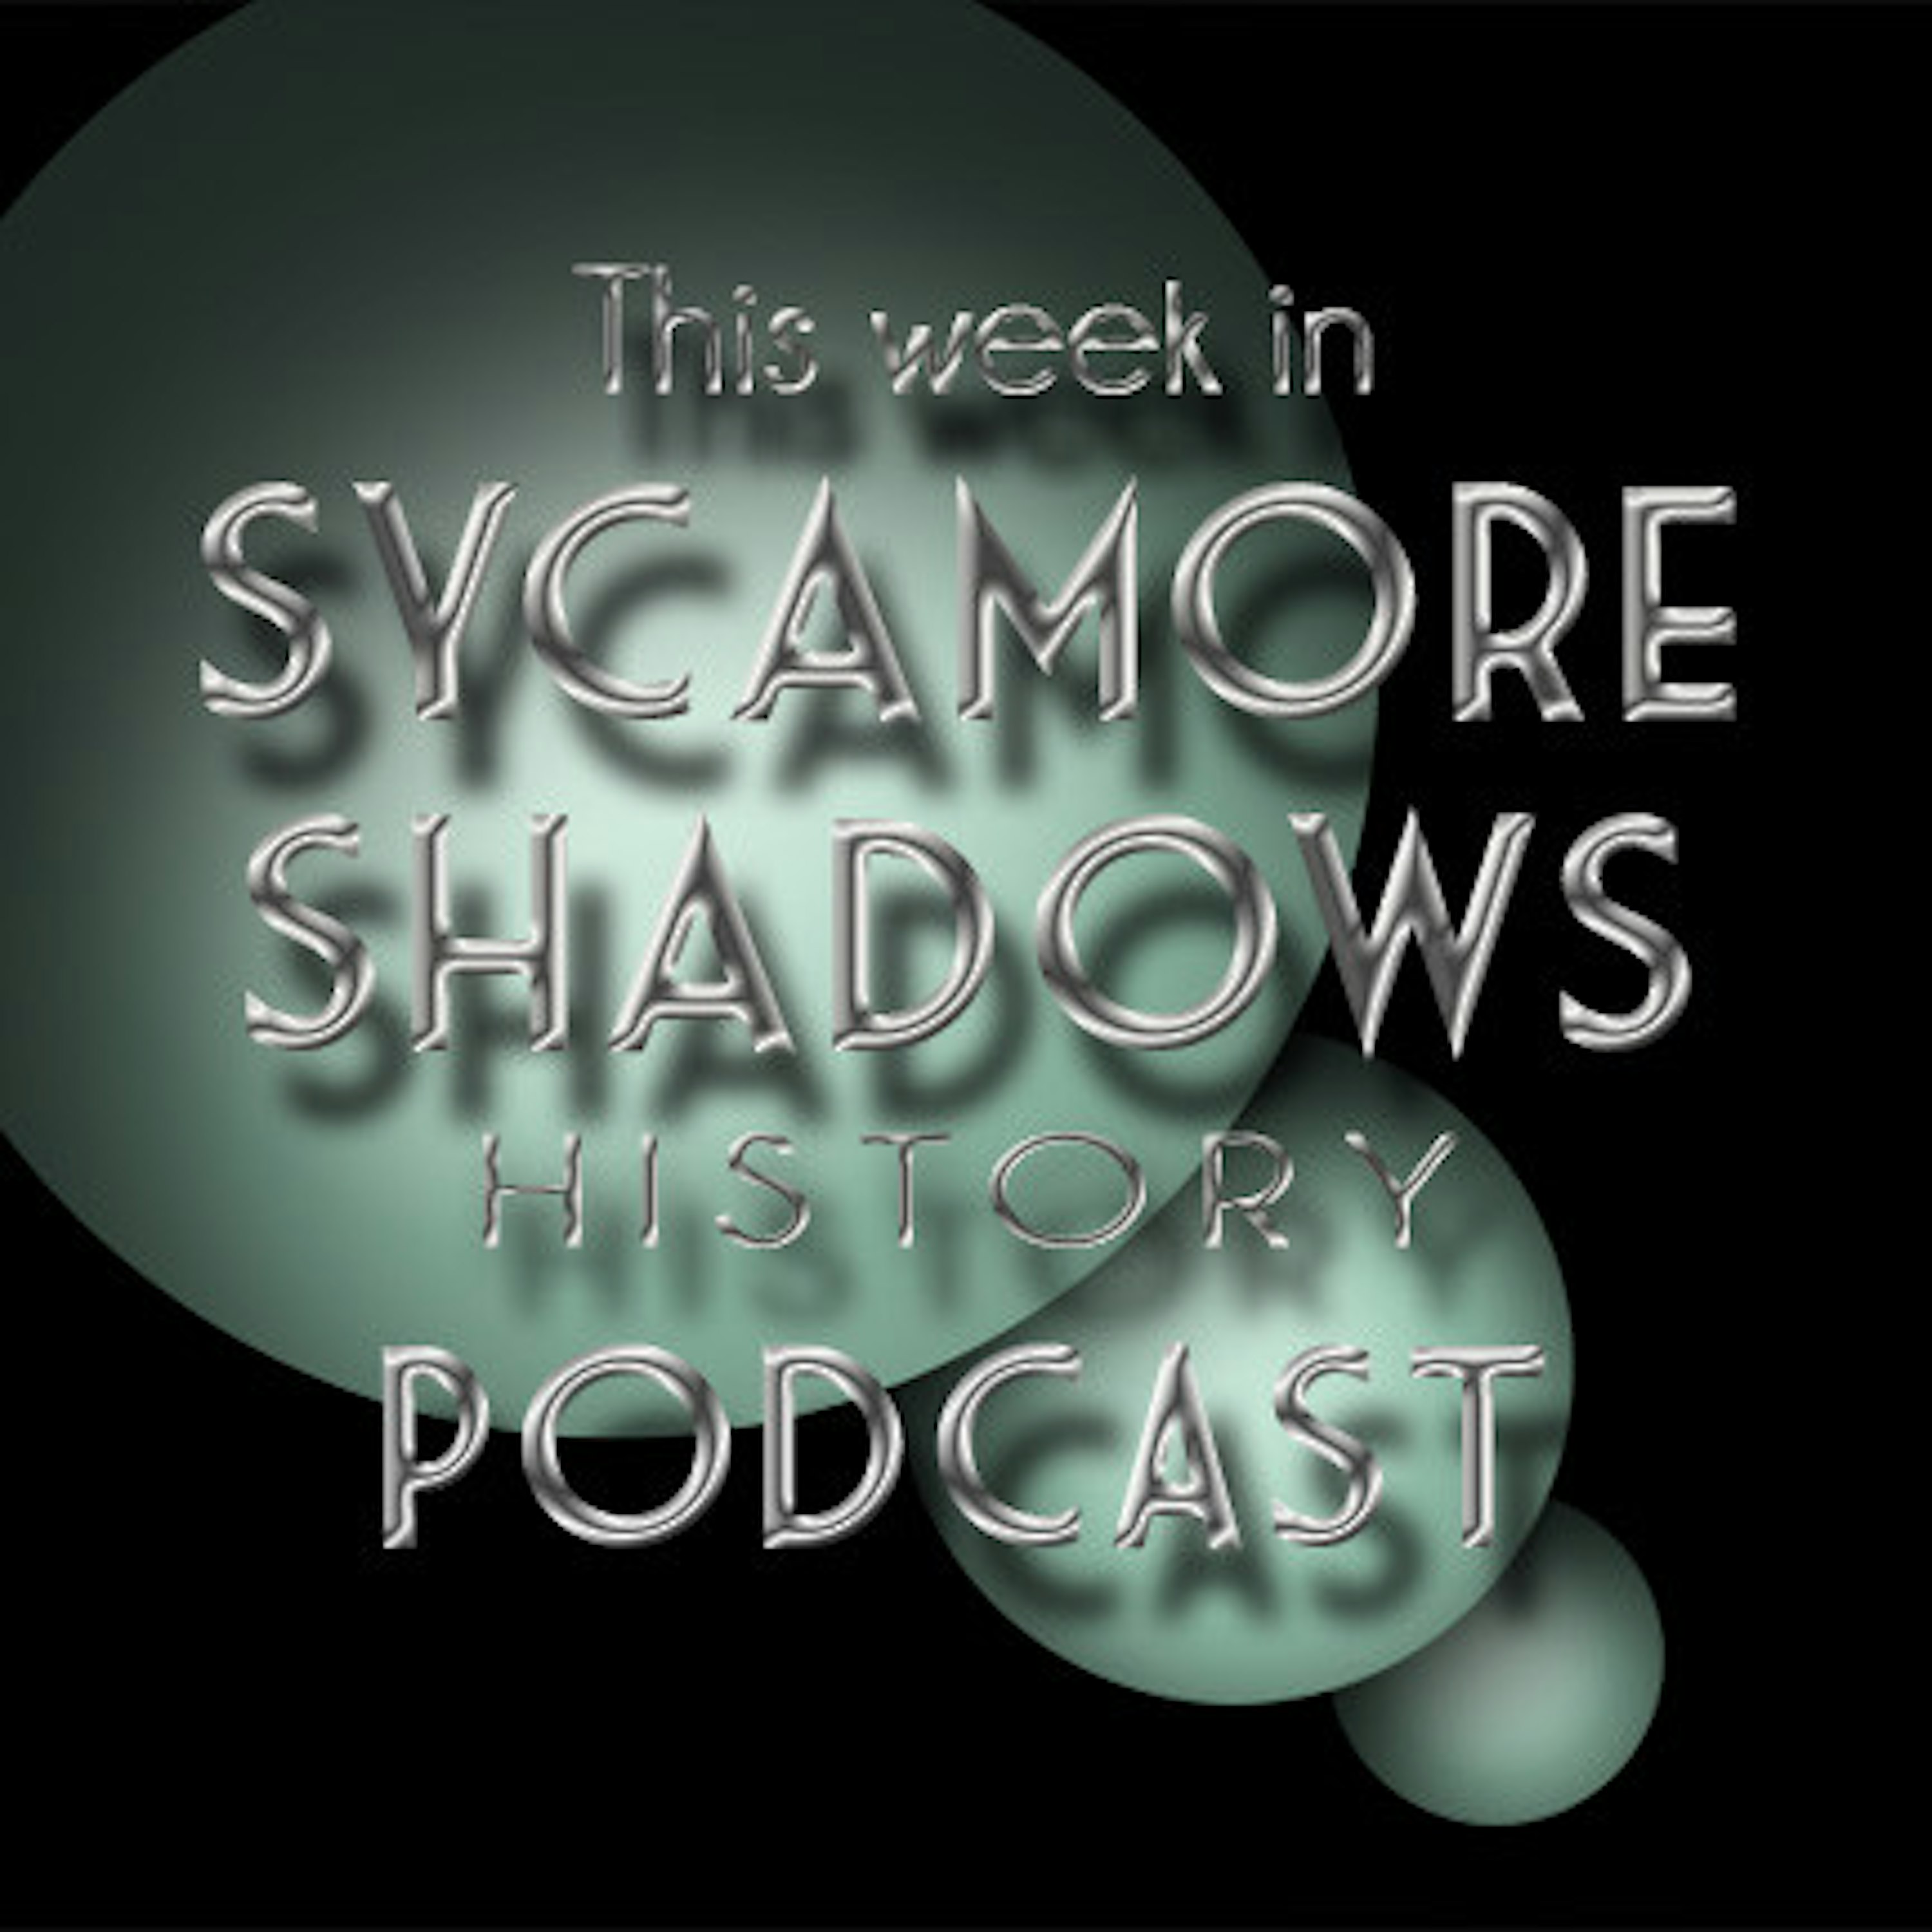 This Week in Sycamore Shadows History